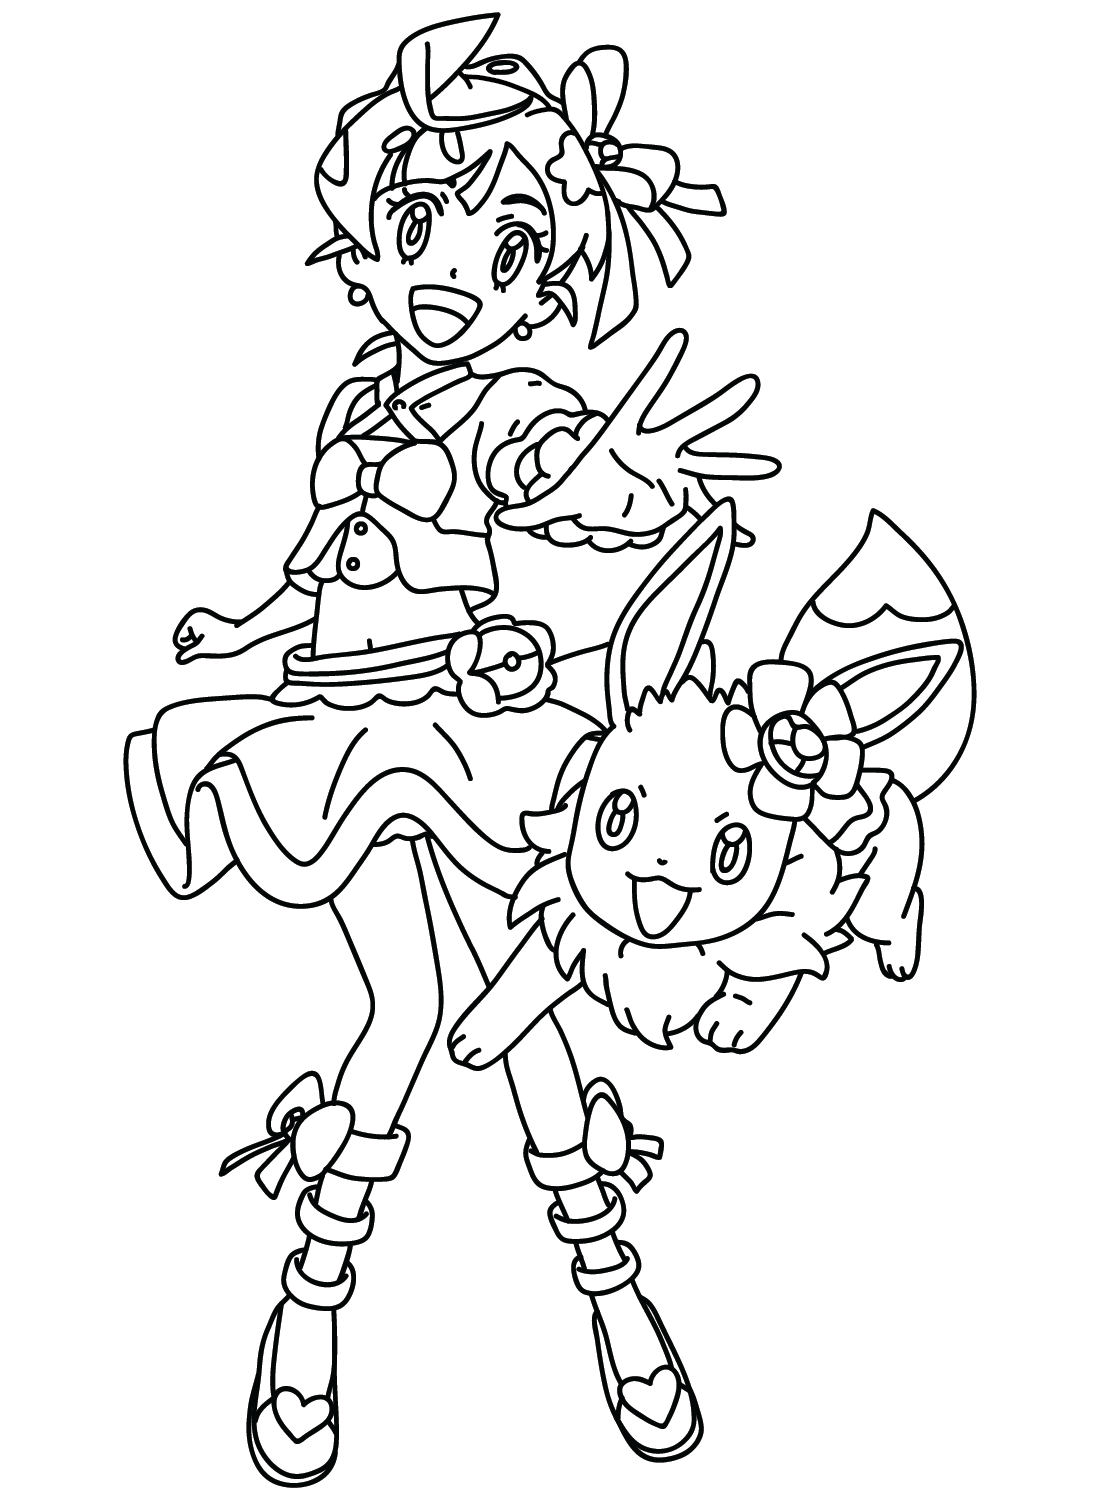 Chloe Cerise, Eevee Pokemon to Color - Free Printable Coloring Pages